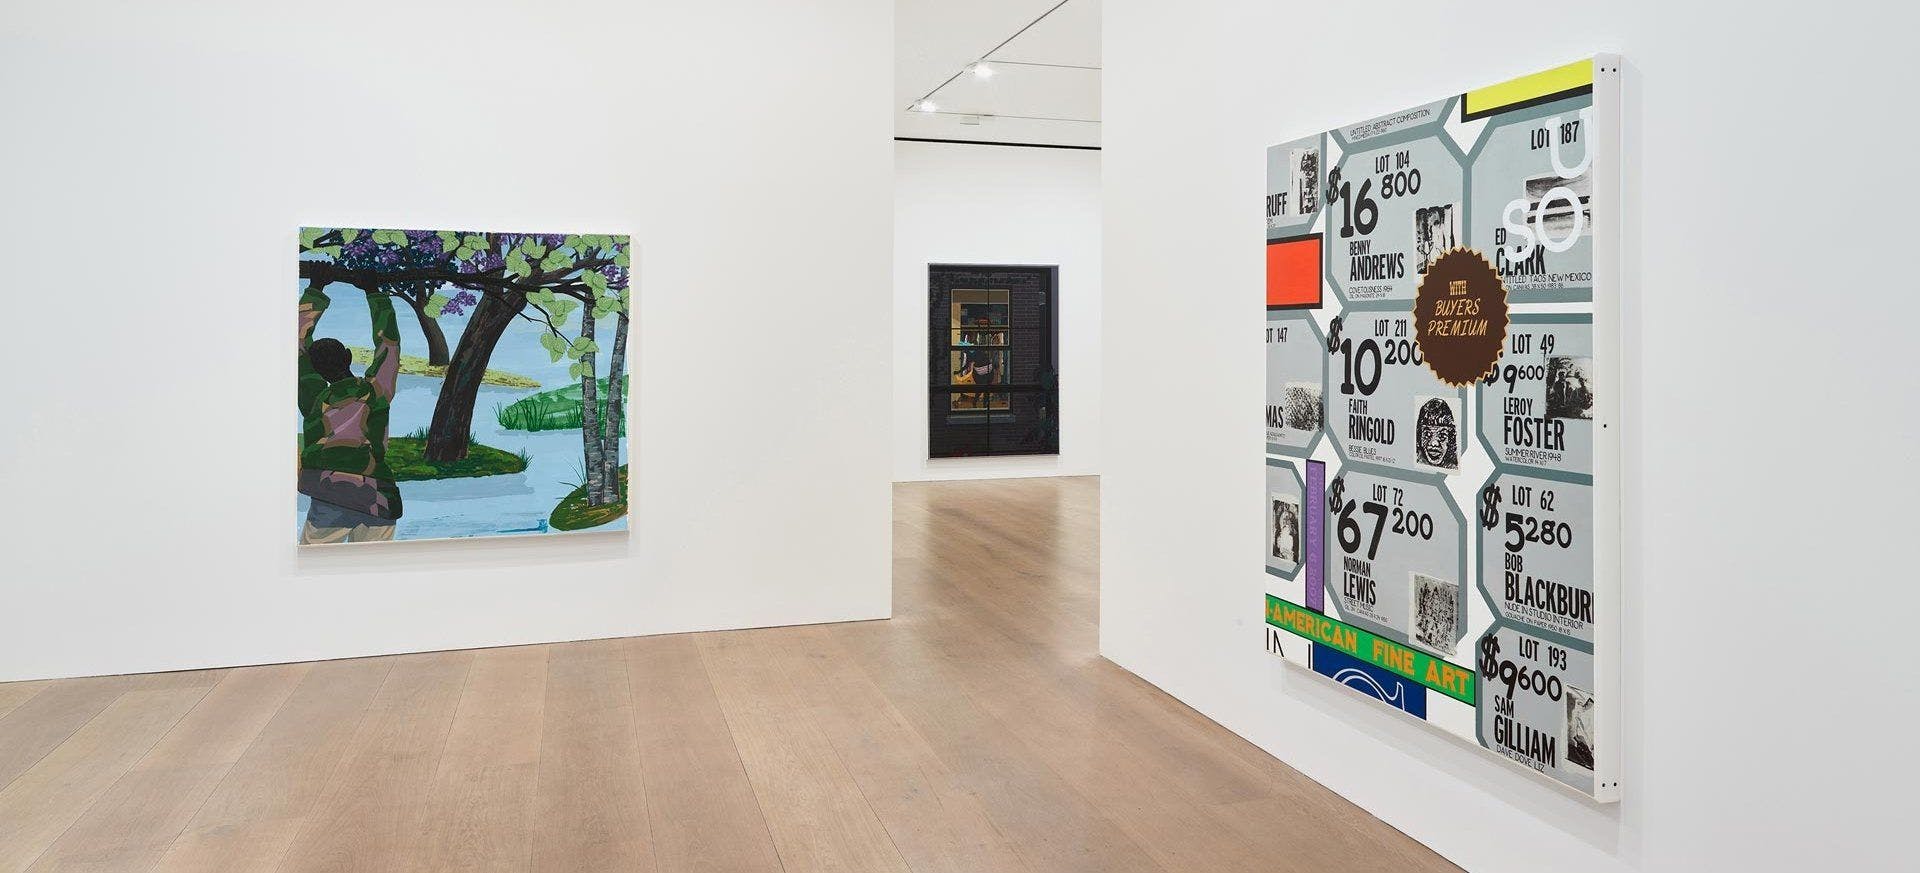 Installation view of the exhibition Toba Khedoori, at David Zwirner in New York, dated 2007. 